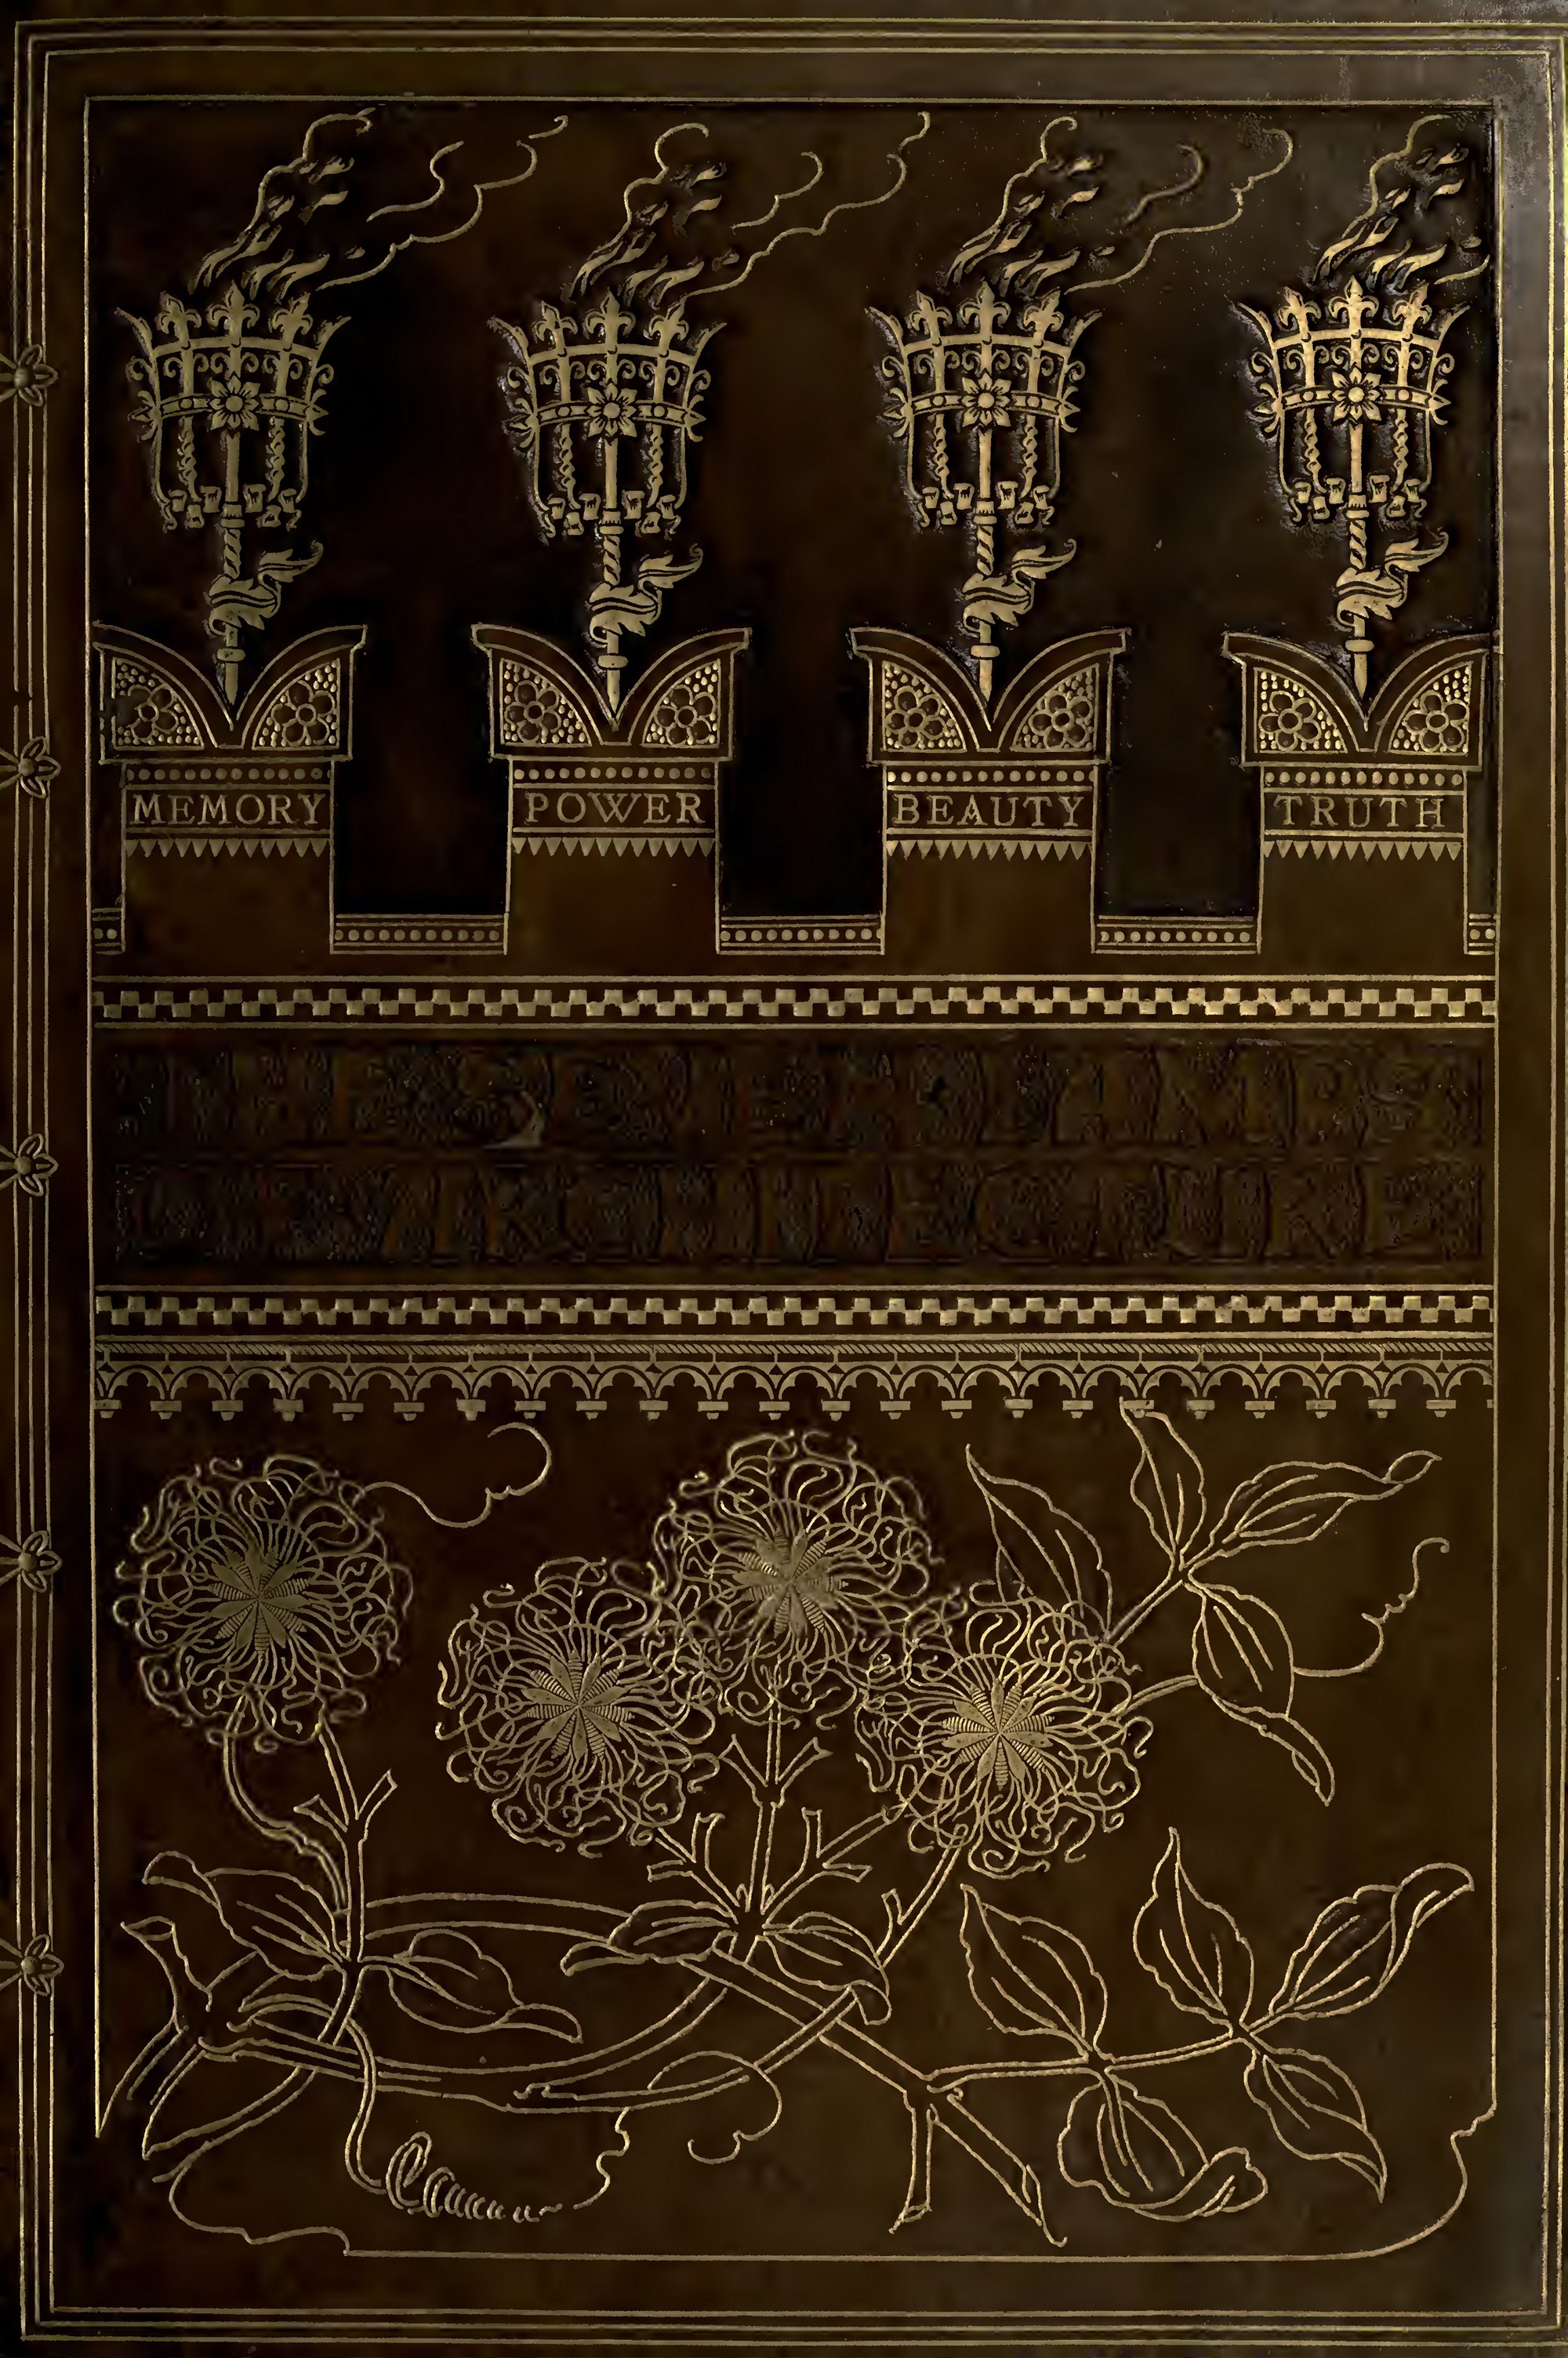 The Seven Lamps of Architecture : with illustrations, drawn by the author / by John Ruskin, honorary student of Christ church, and honorary fellow of Corpus Christi college, Oxford, etc., etc. — Sixth edition. — Sunnyside, Orpington, Kent : Published by George Allen, 1889